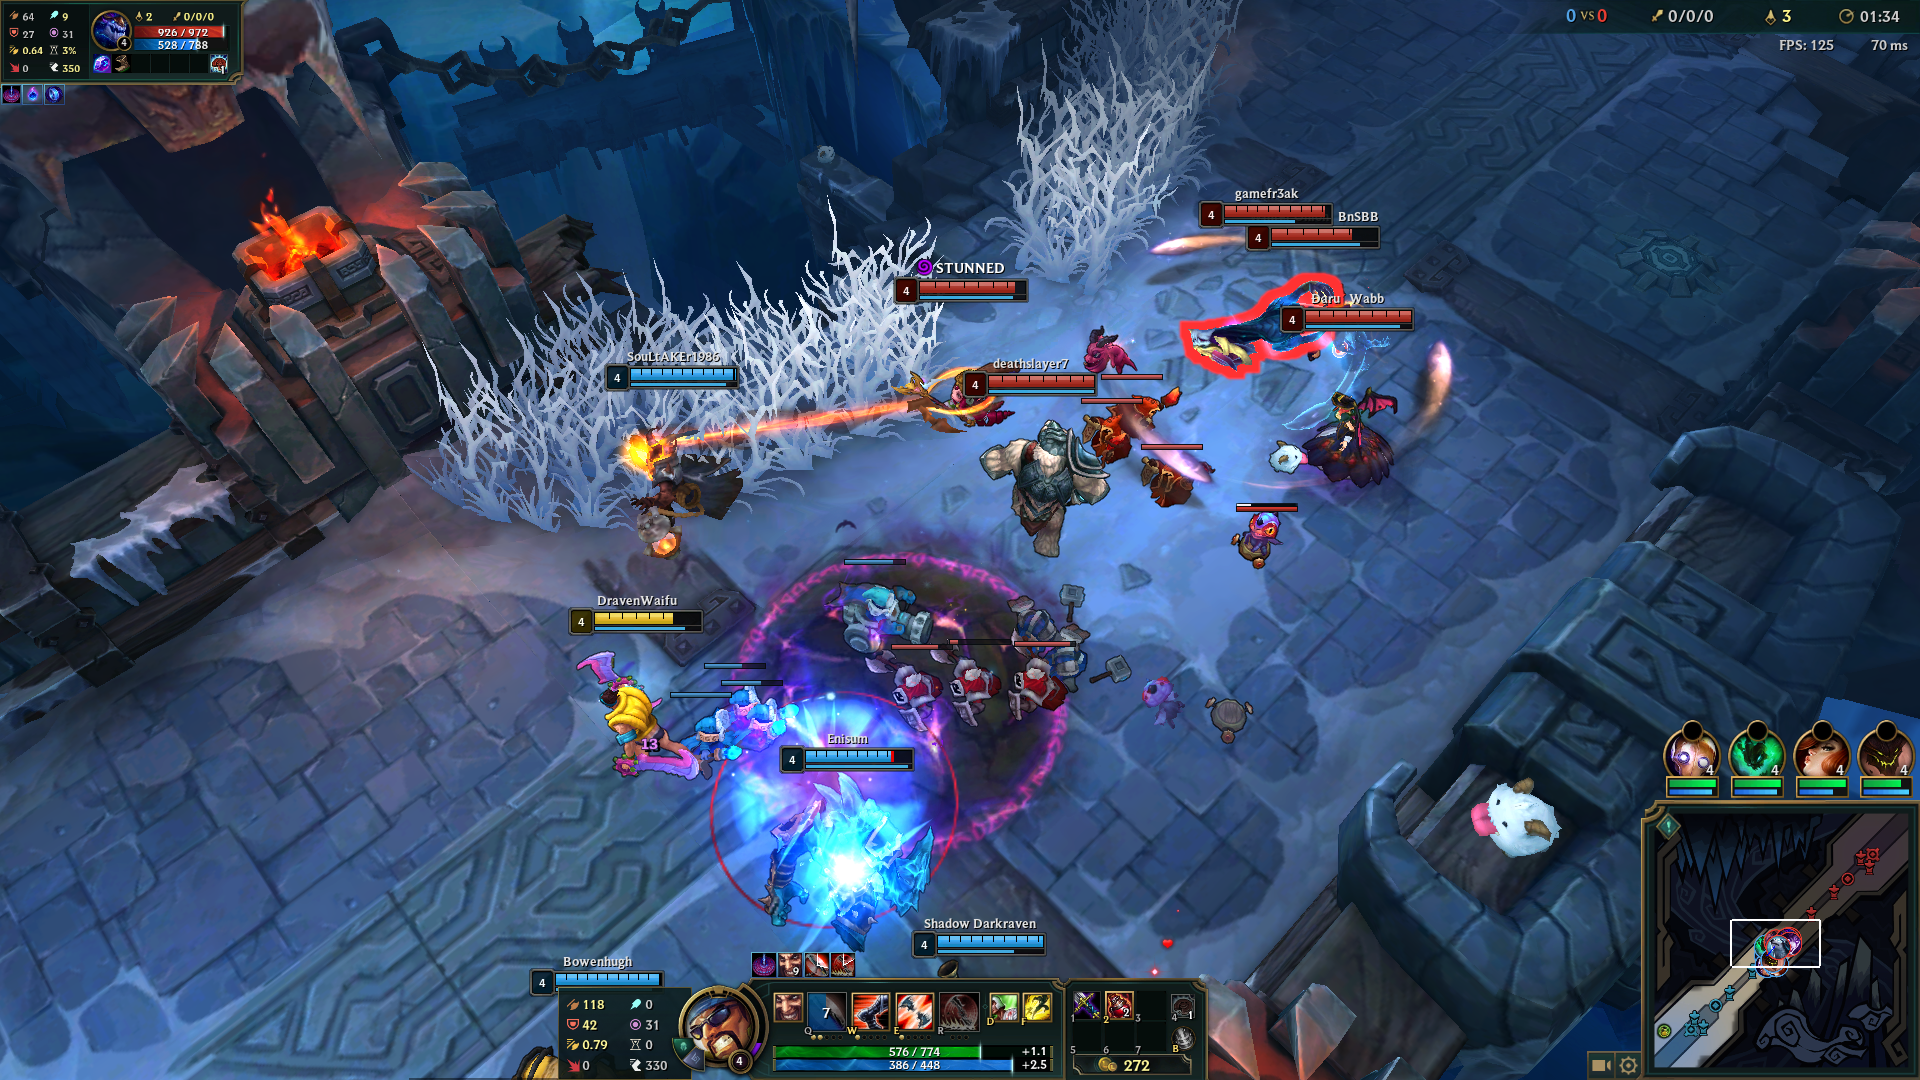 League of Legends - LOL 13.21 - Download for PC Free